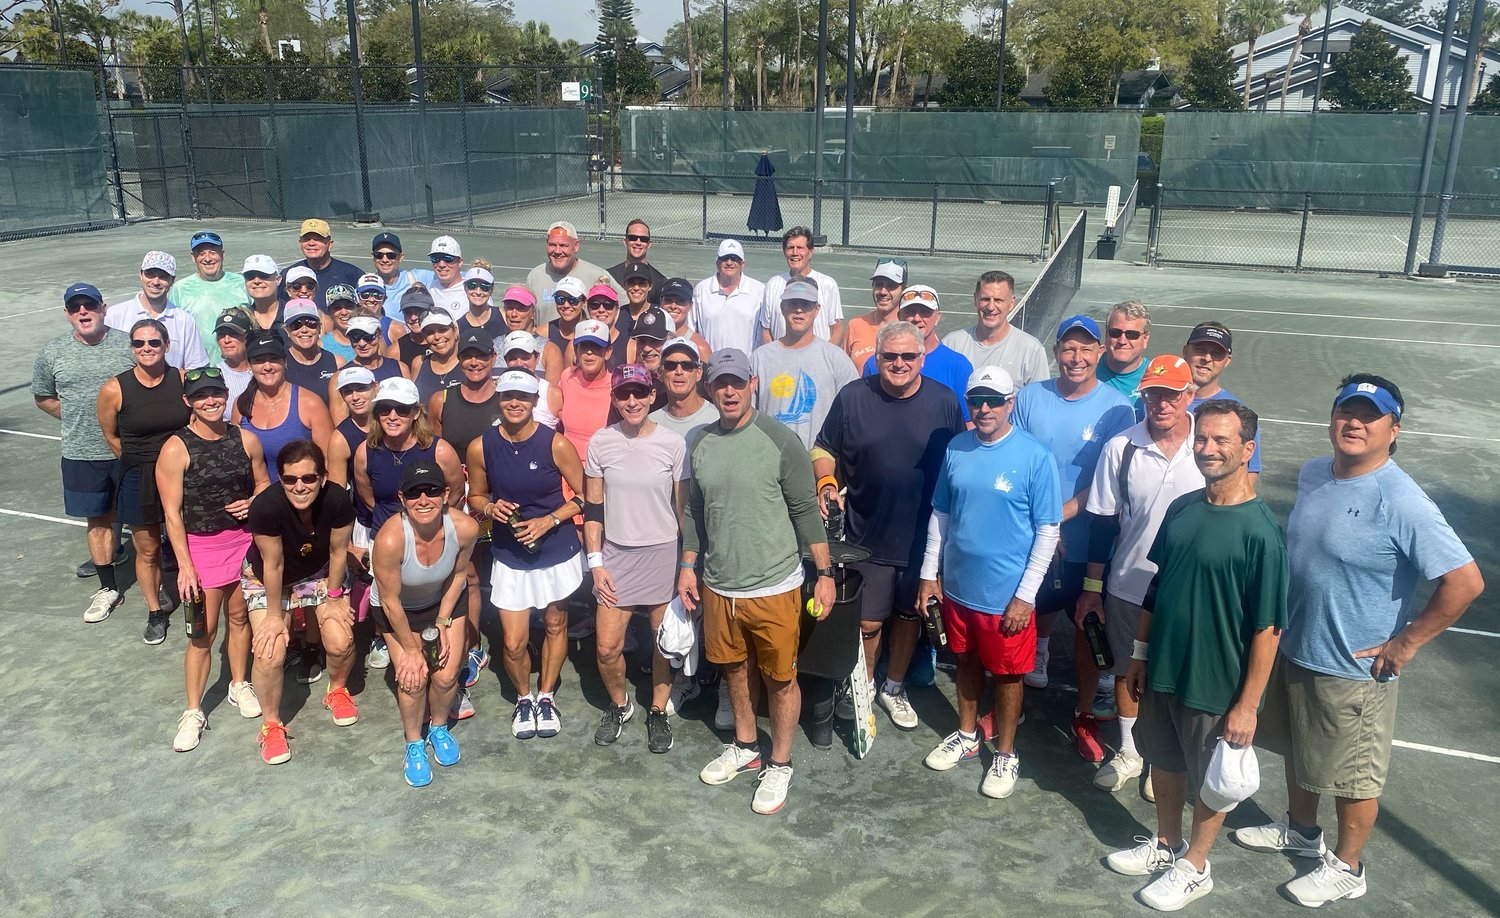 Inaugural ‘Battle of the Beaches’ tennis event held The Ponte Vedra